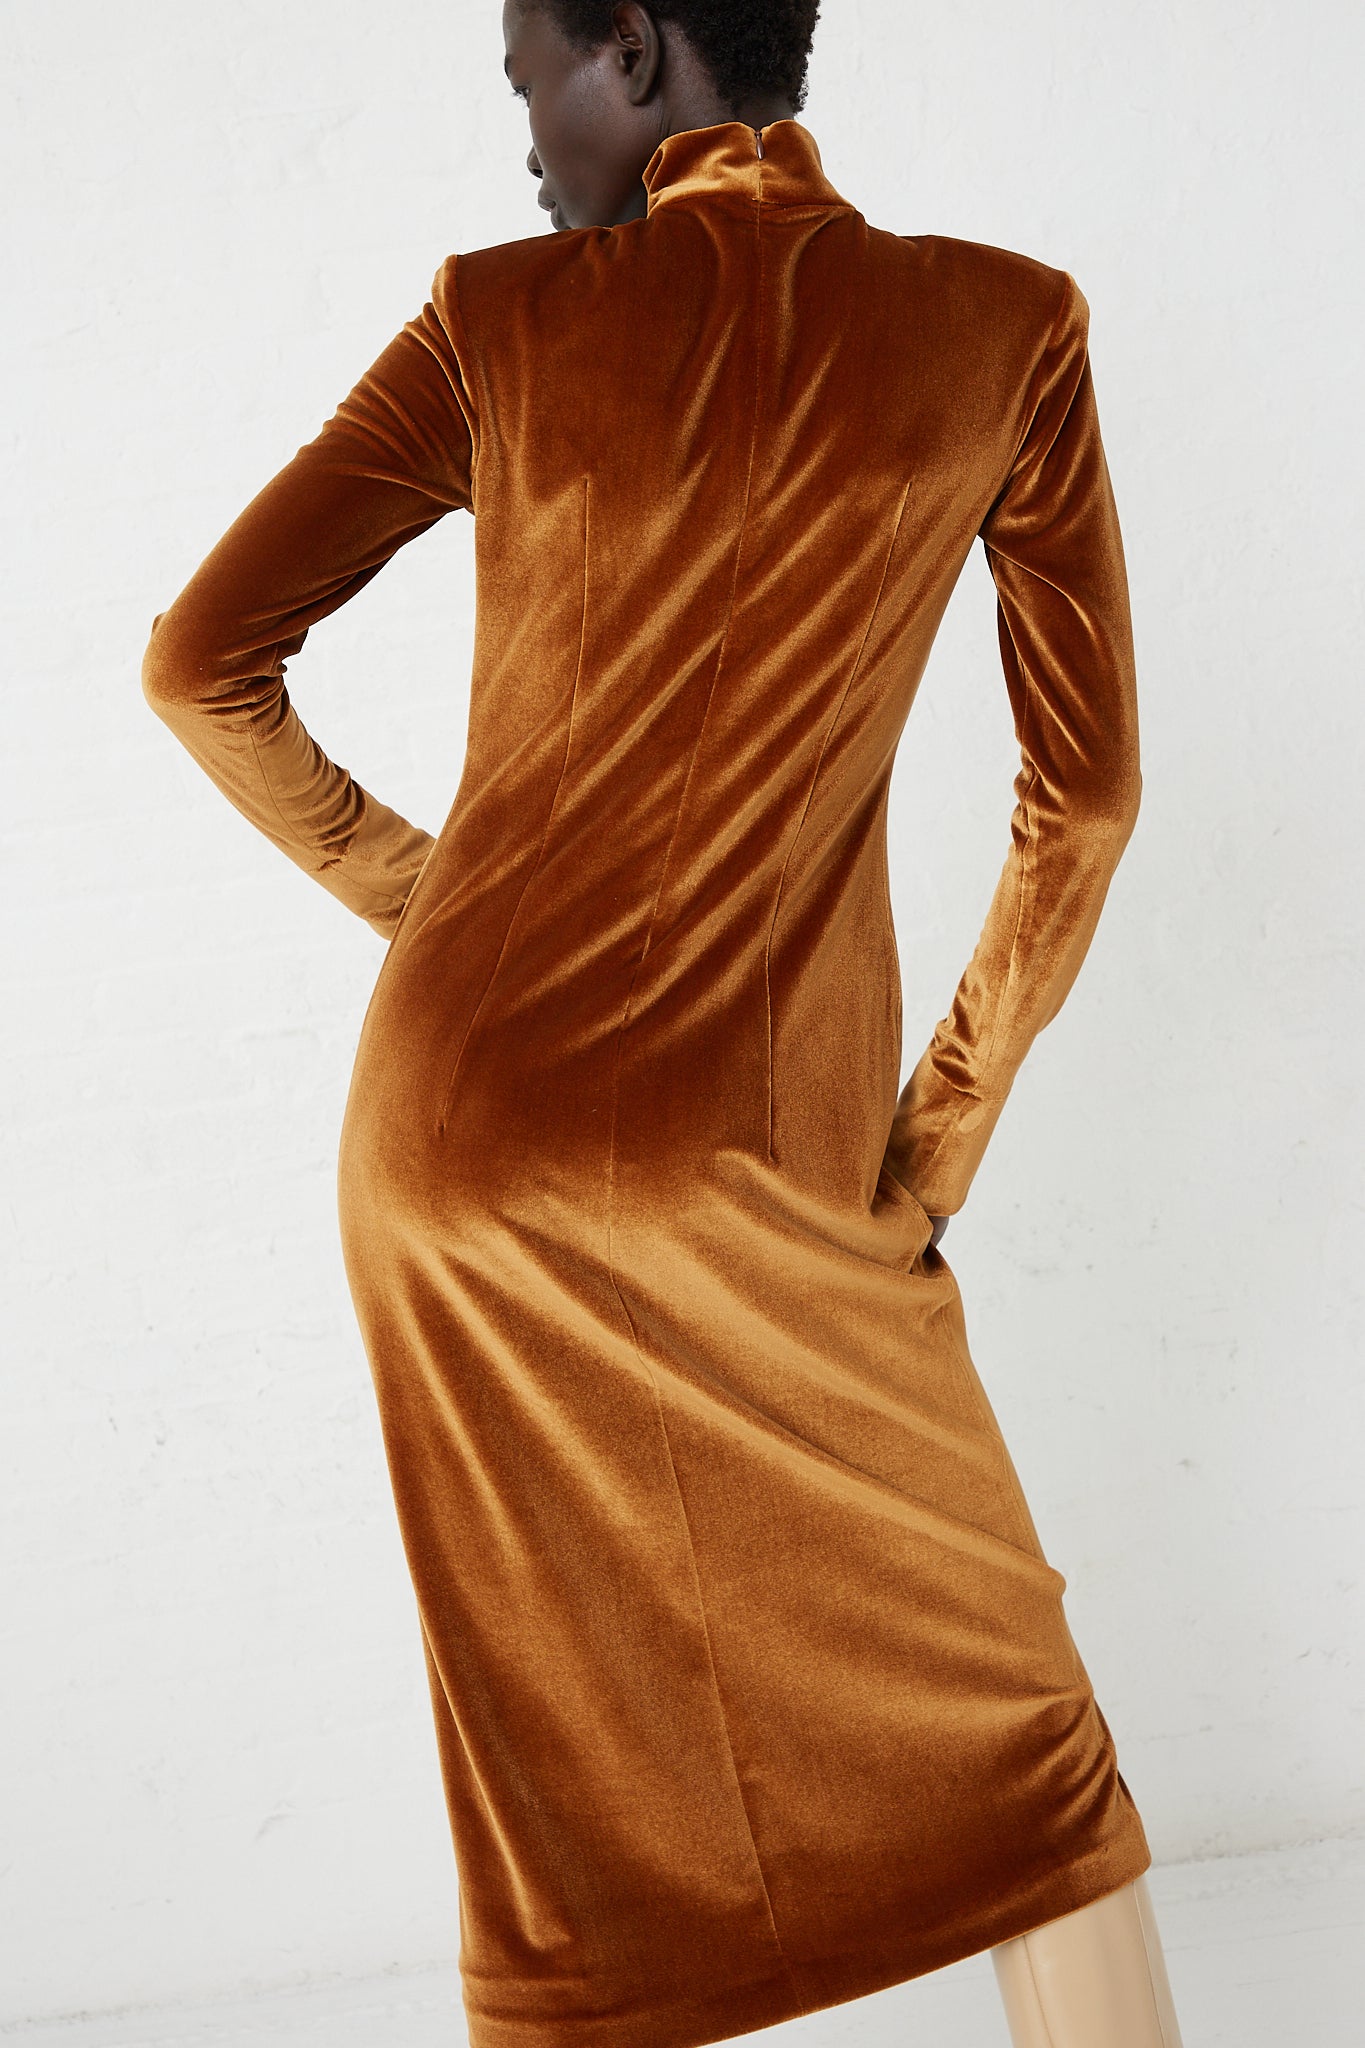 The back view of a woman in a slim fit Velvet Turtleneck Dress in Cognac made by Veronique Leroy.